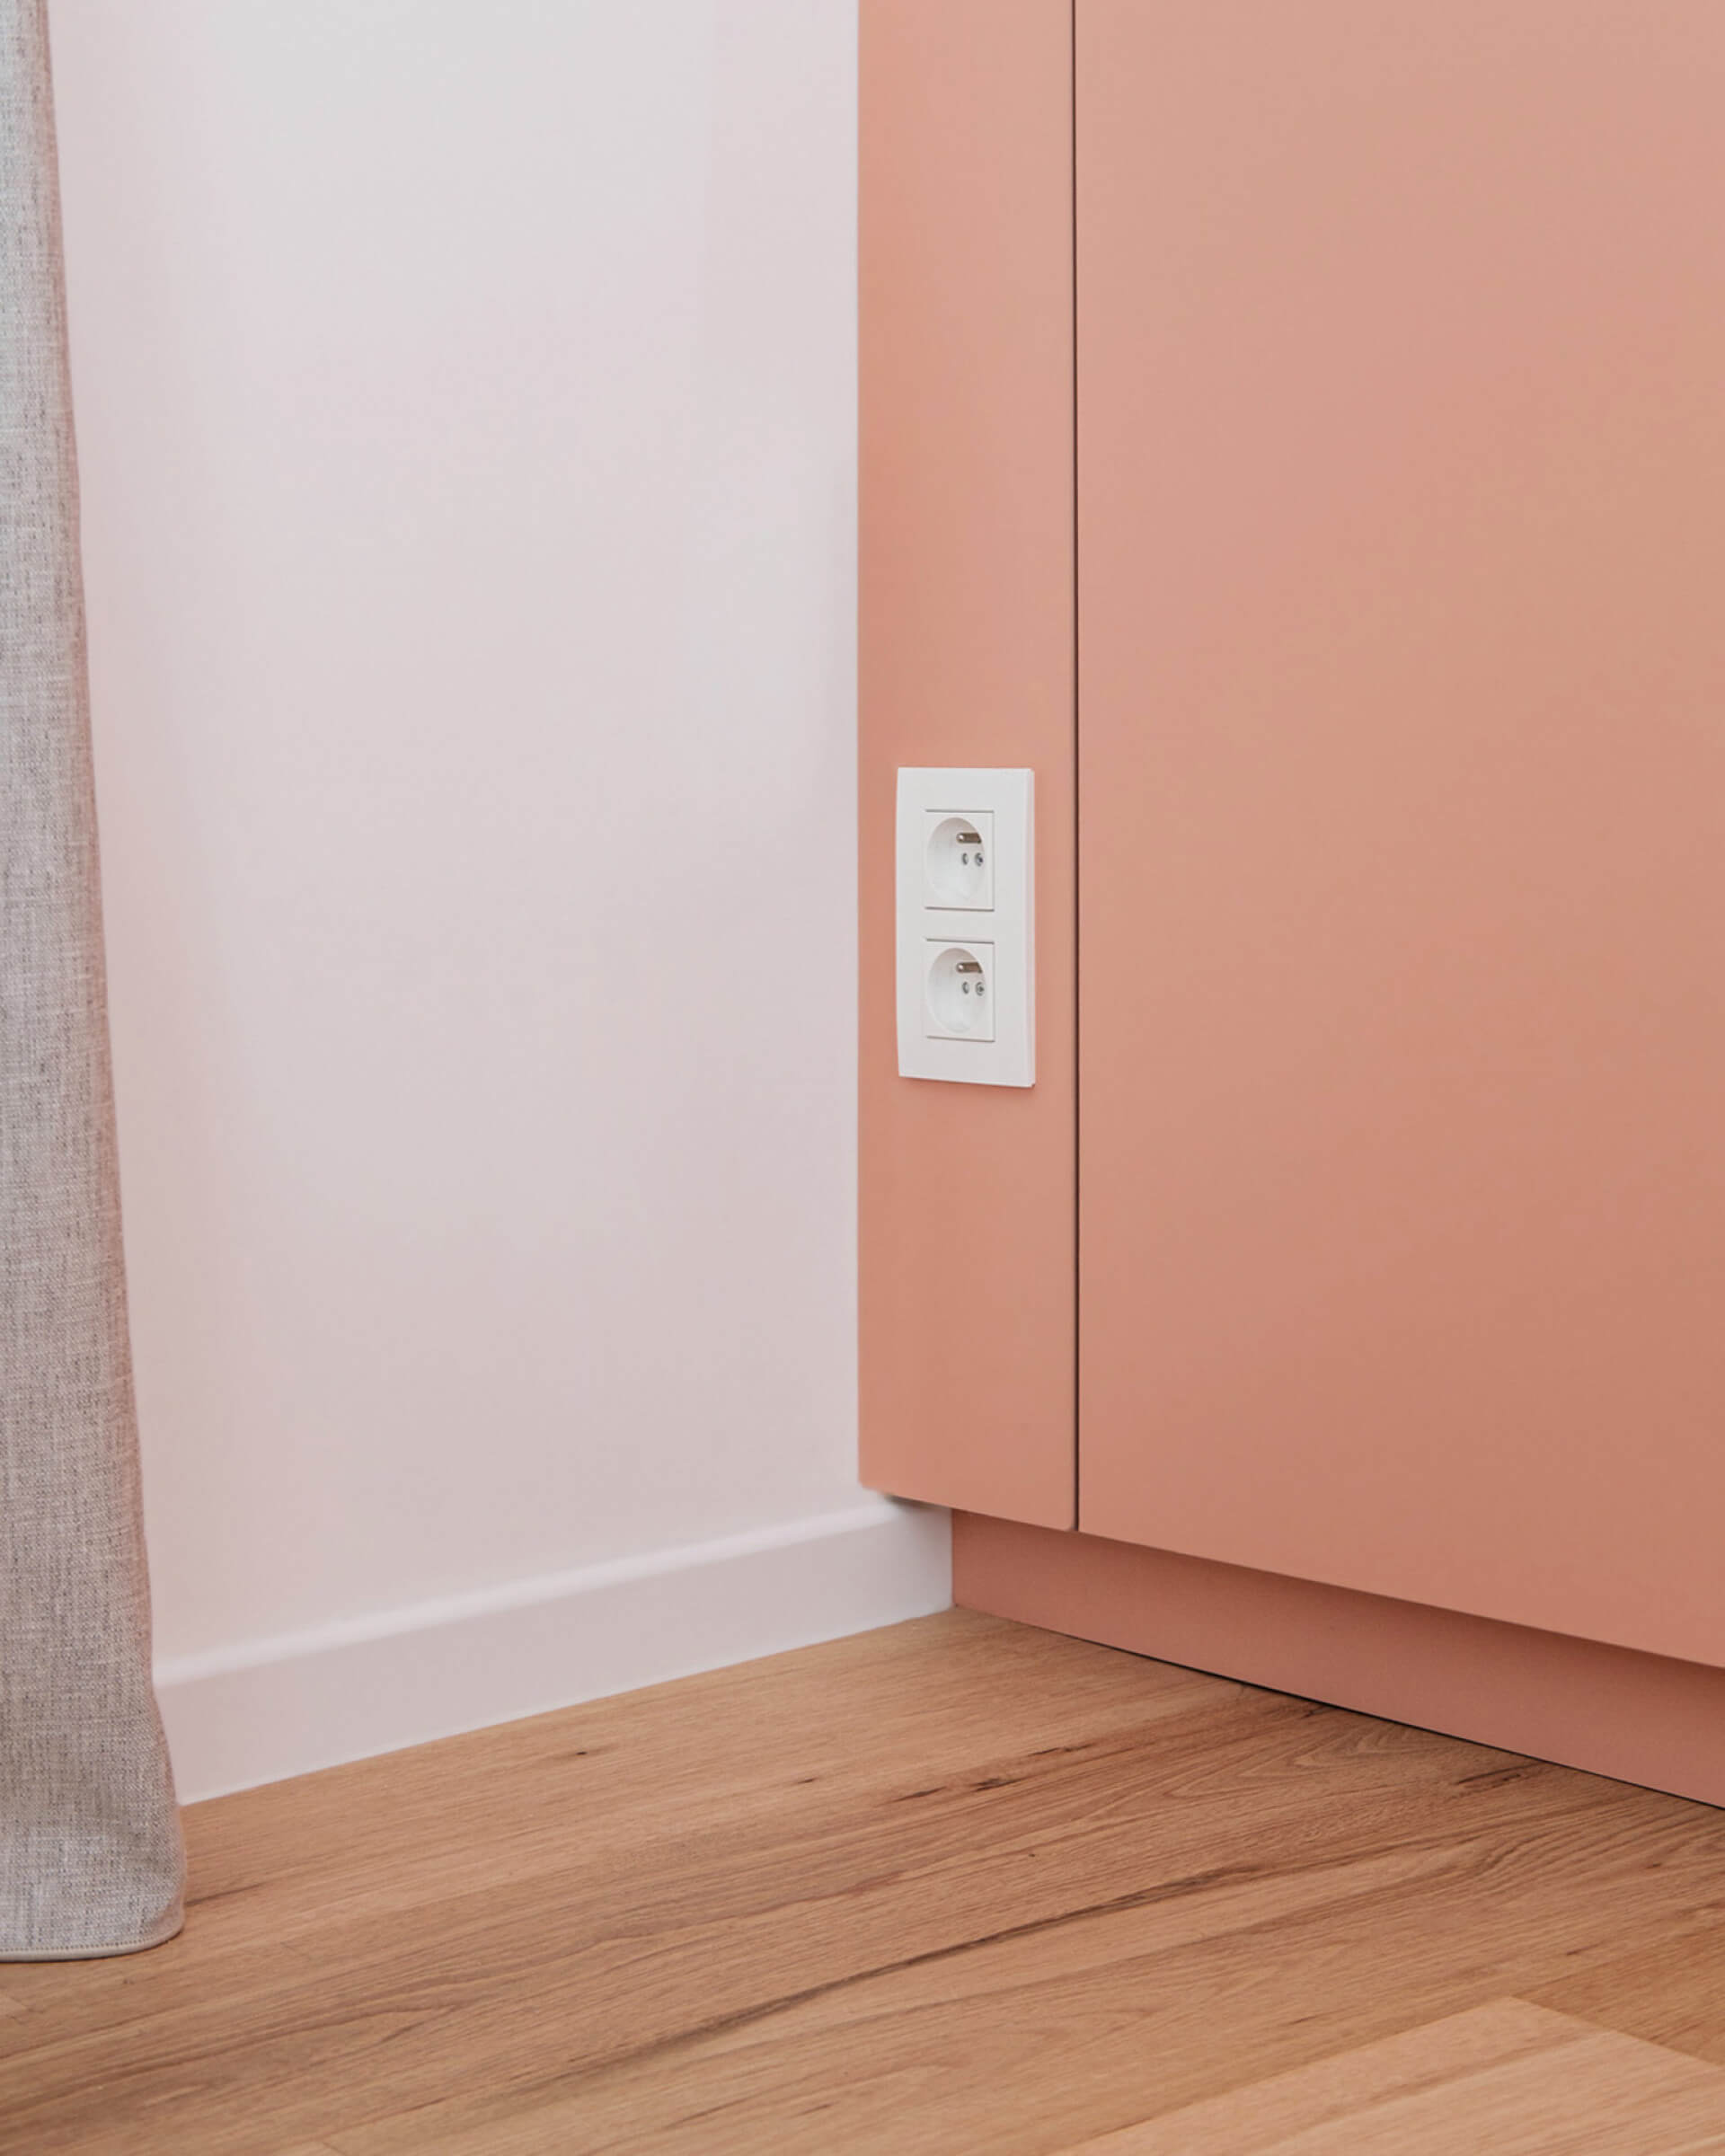 Incorporating electrical outlets into a custom cabinet